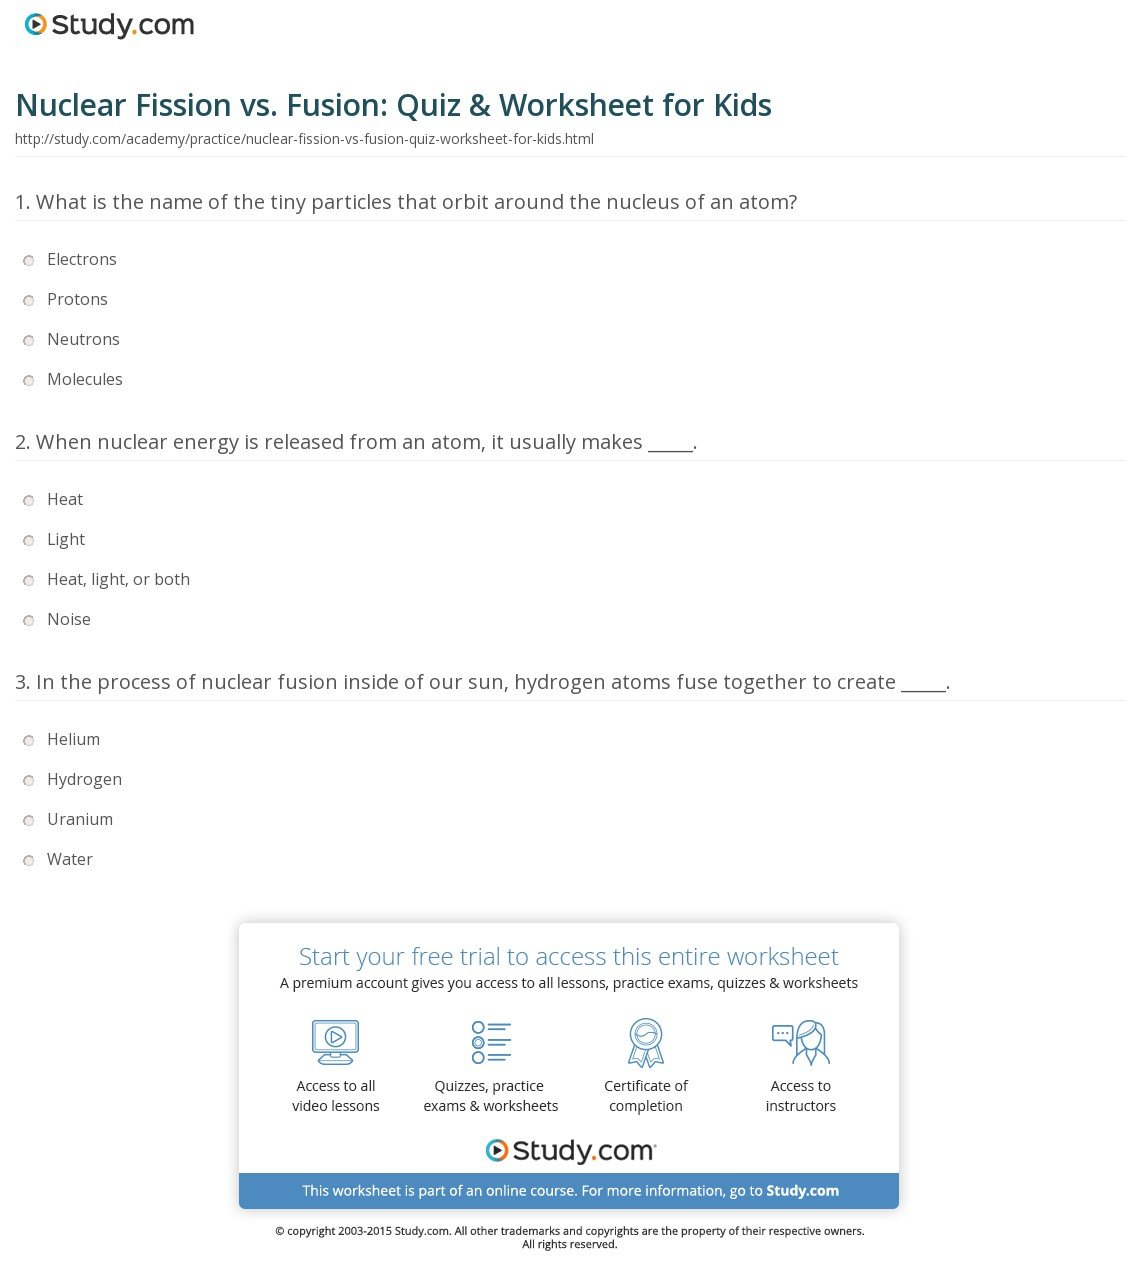 Nuclear Fission Vs Fusion Quiz  Worksheet For Kids  Study Together With Fission And Fusion Worksheet